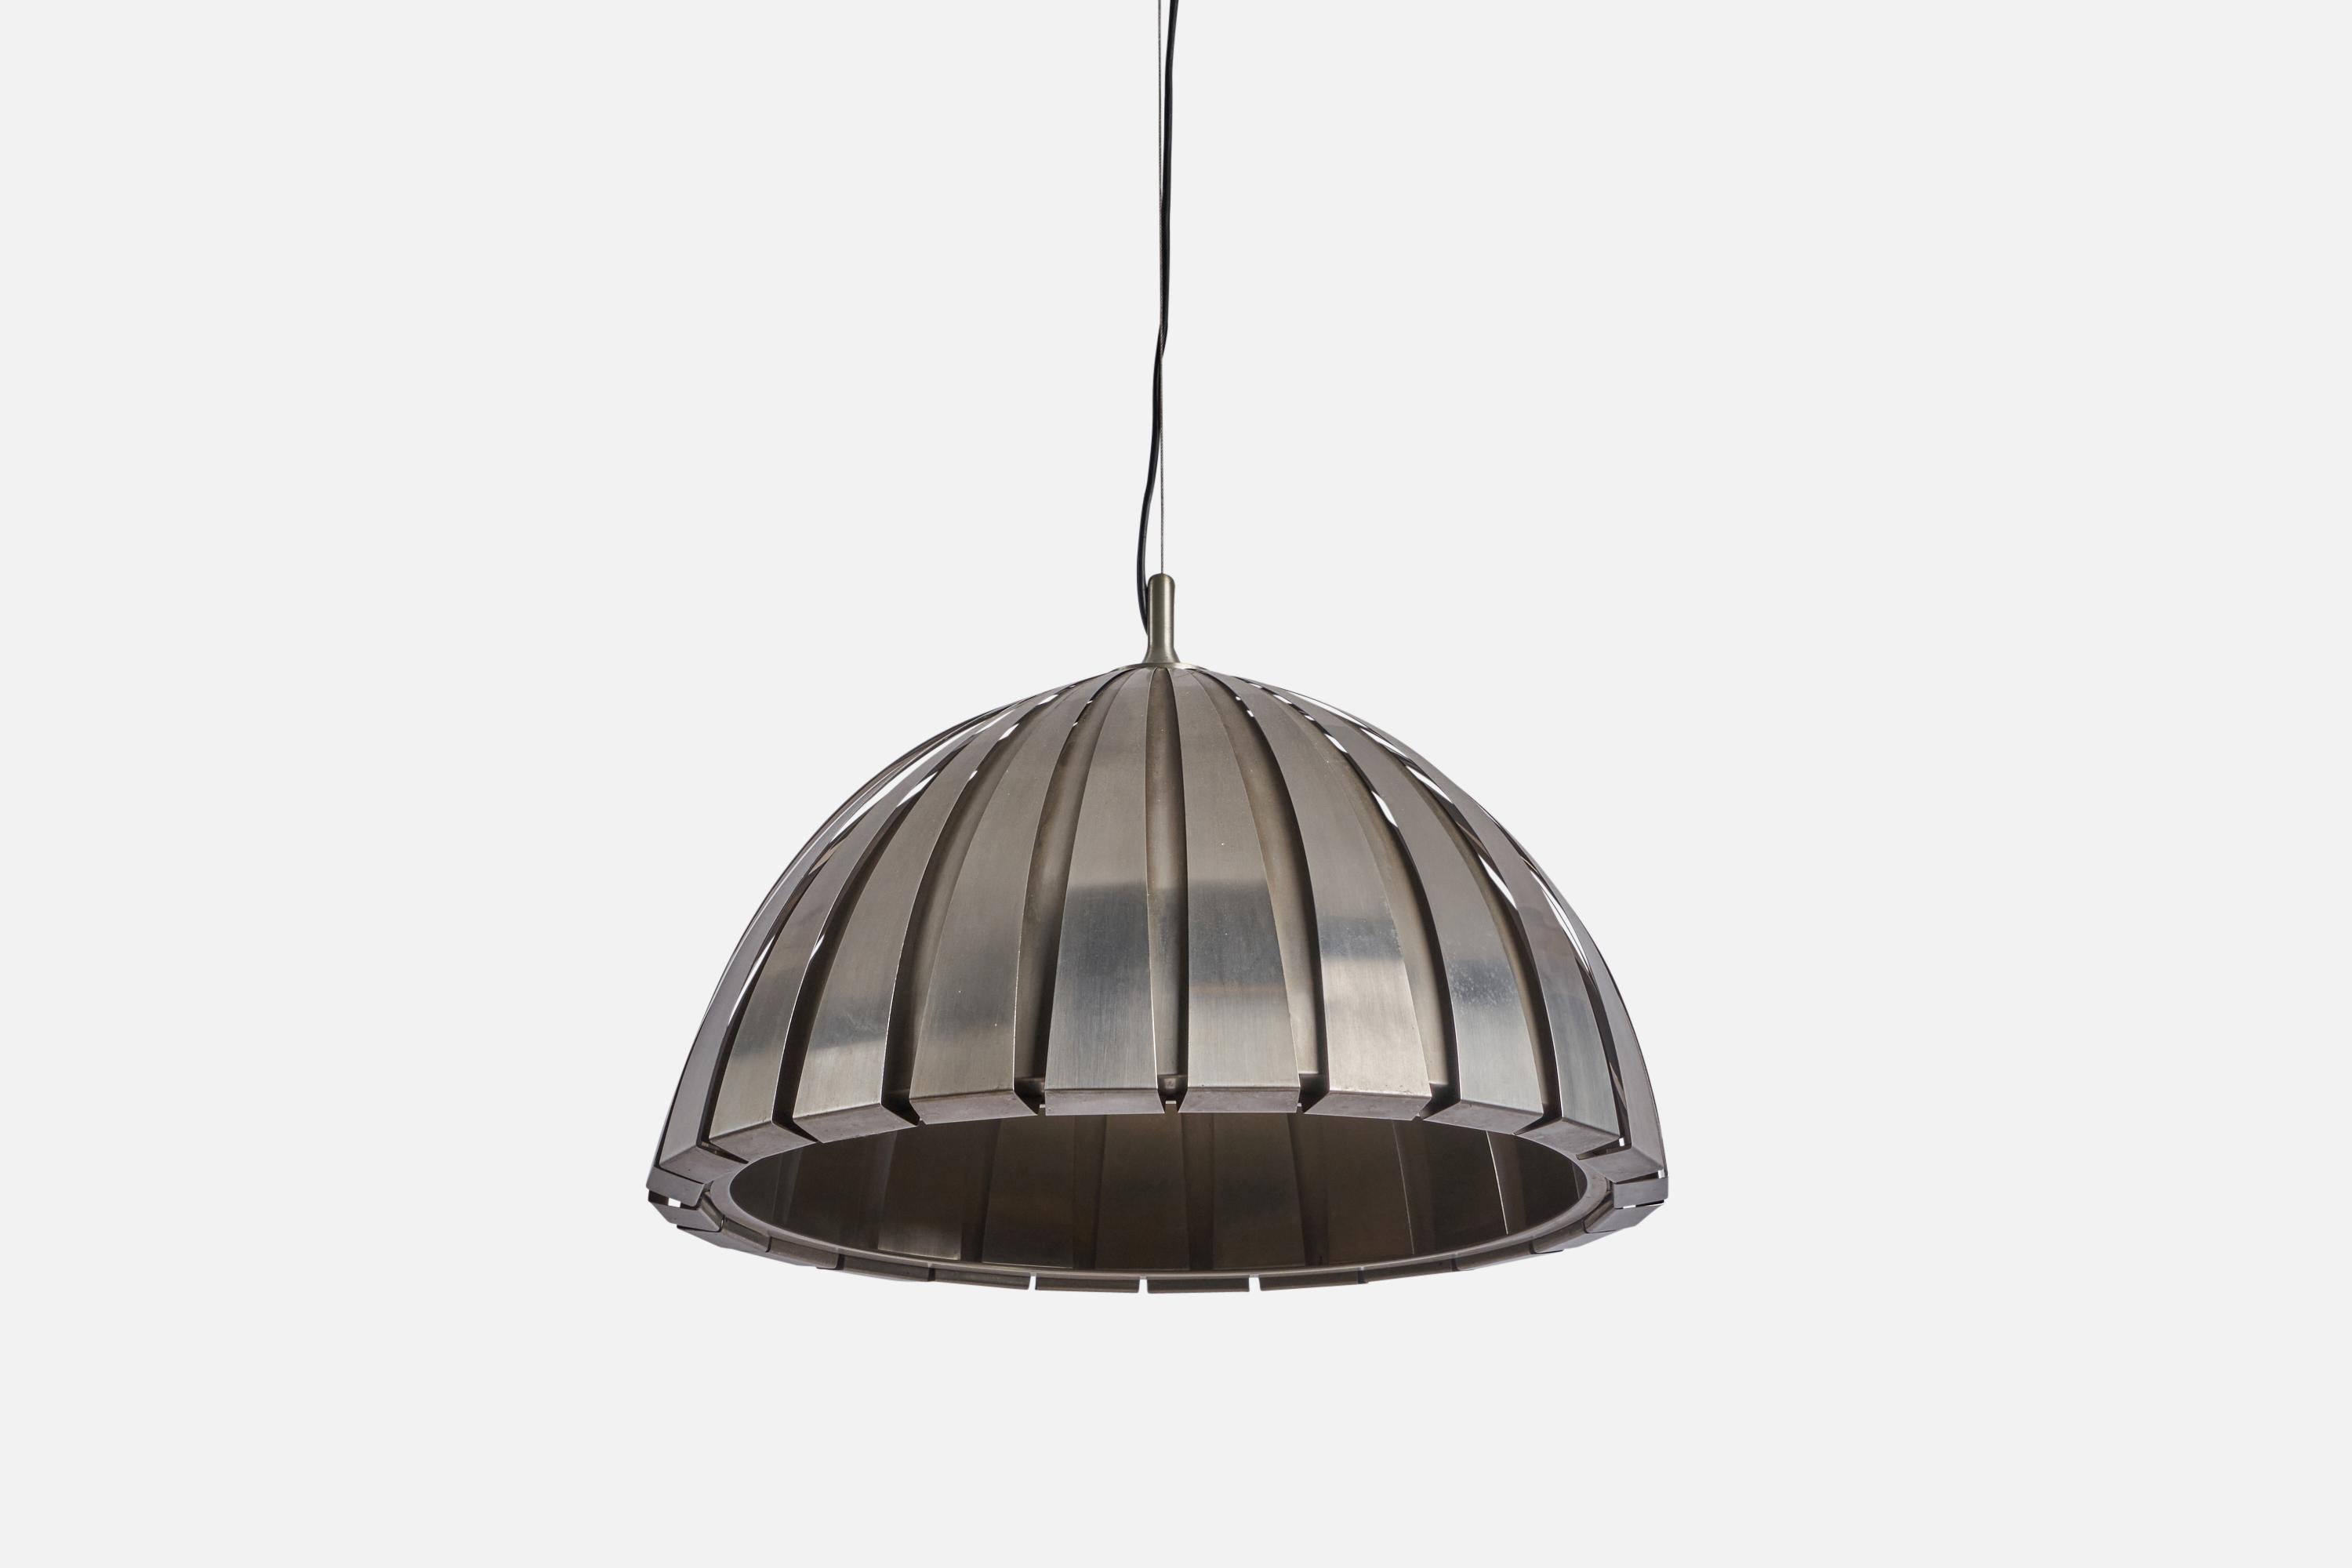 An aluminium and metal pendant light designed by Elio Martinelli and produced by Martinelli Luce, Italy, c. 1970s.

Overall Dimensions (inches): 13” H x 22” Diameter
Bulb Specifications: E-26 Bulb
Number of Sockets: 1
Variable drop length 